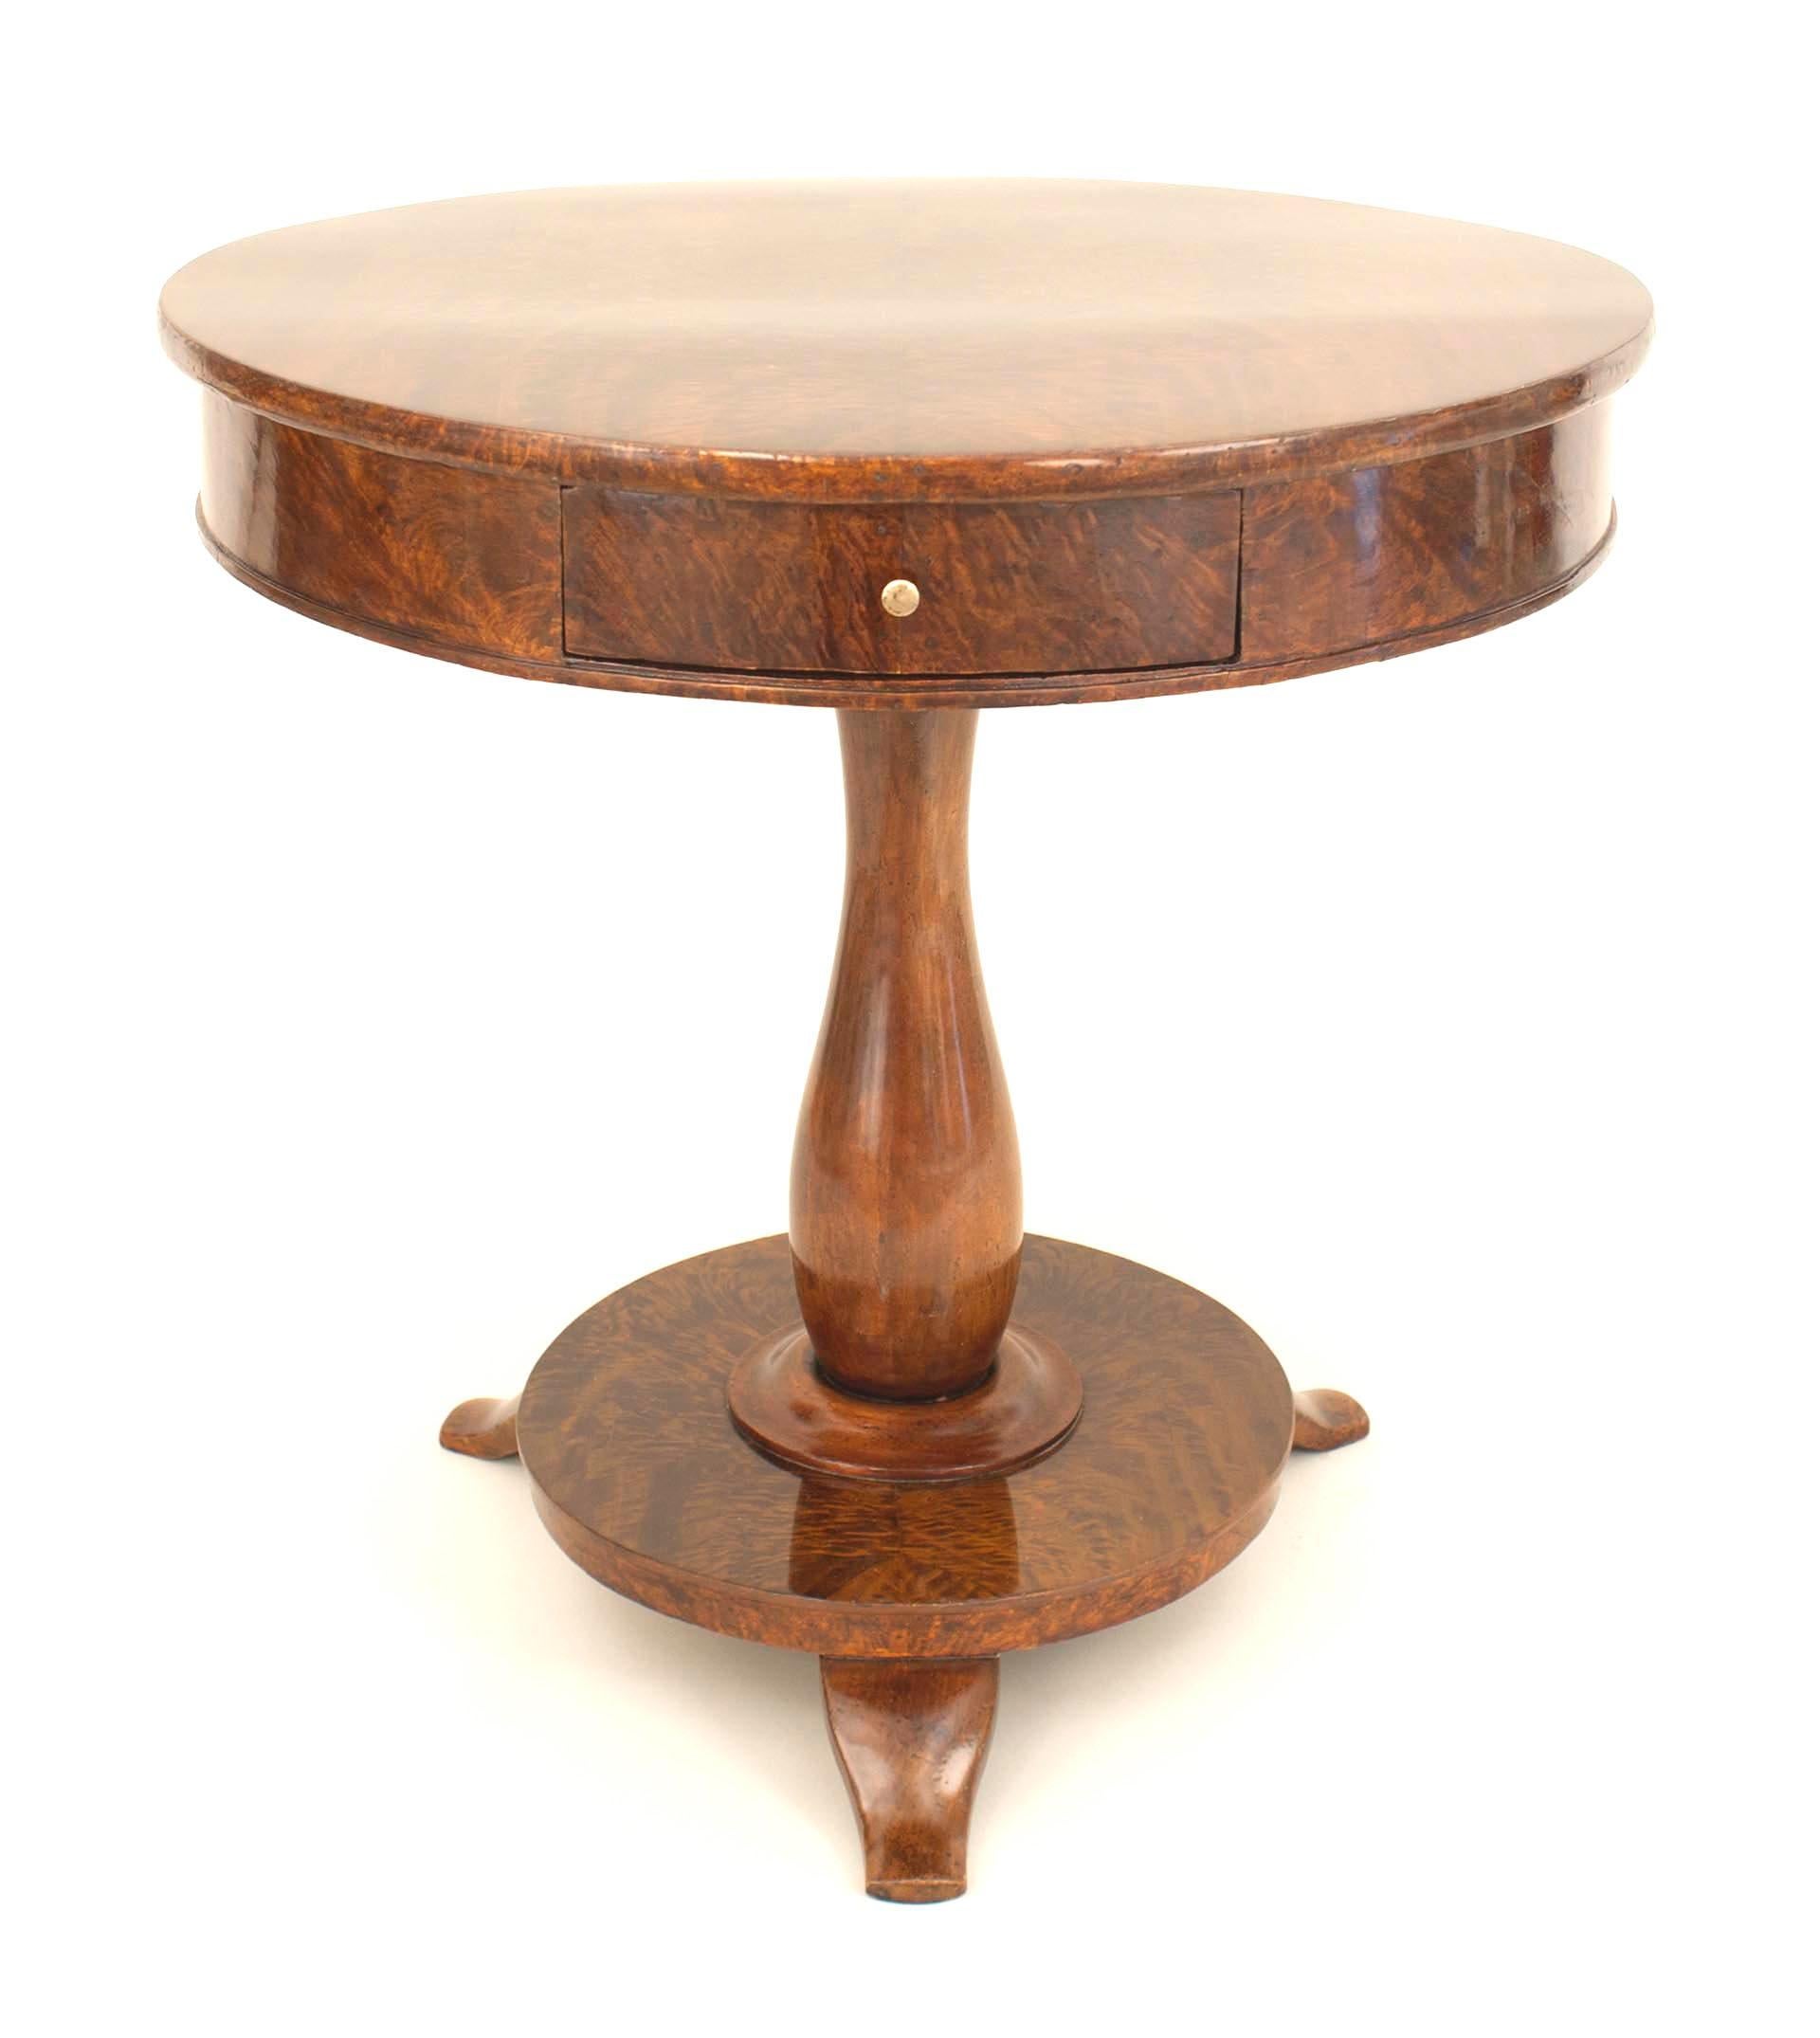 Continental (possibly Baltic) 19th century mahogany end table with a round top having a single drawer resting on a pedestal base over a round platform with 3 feet.